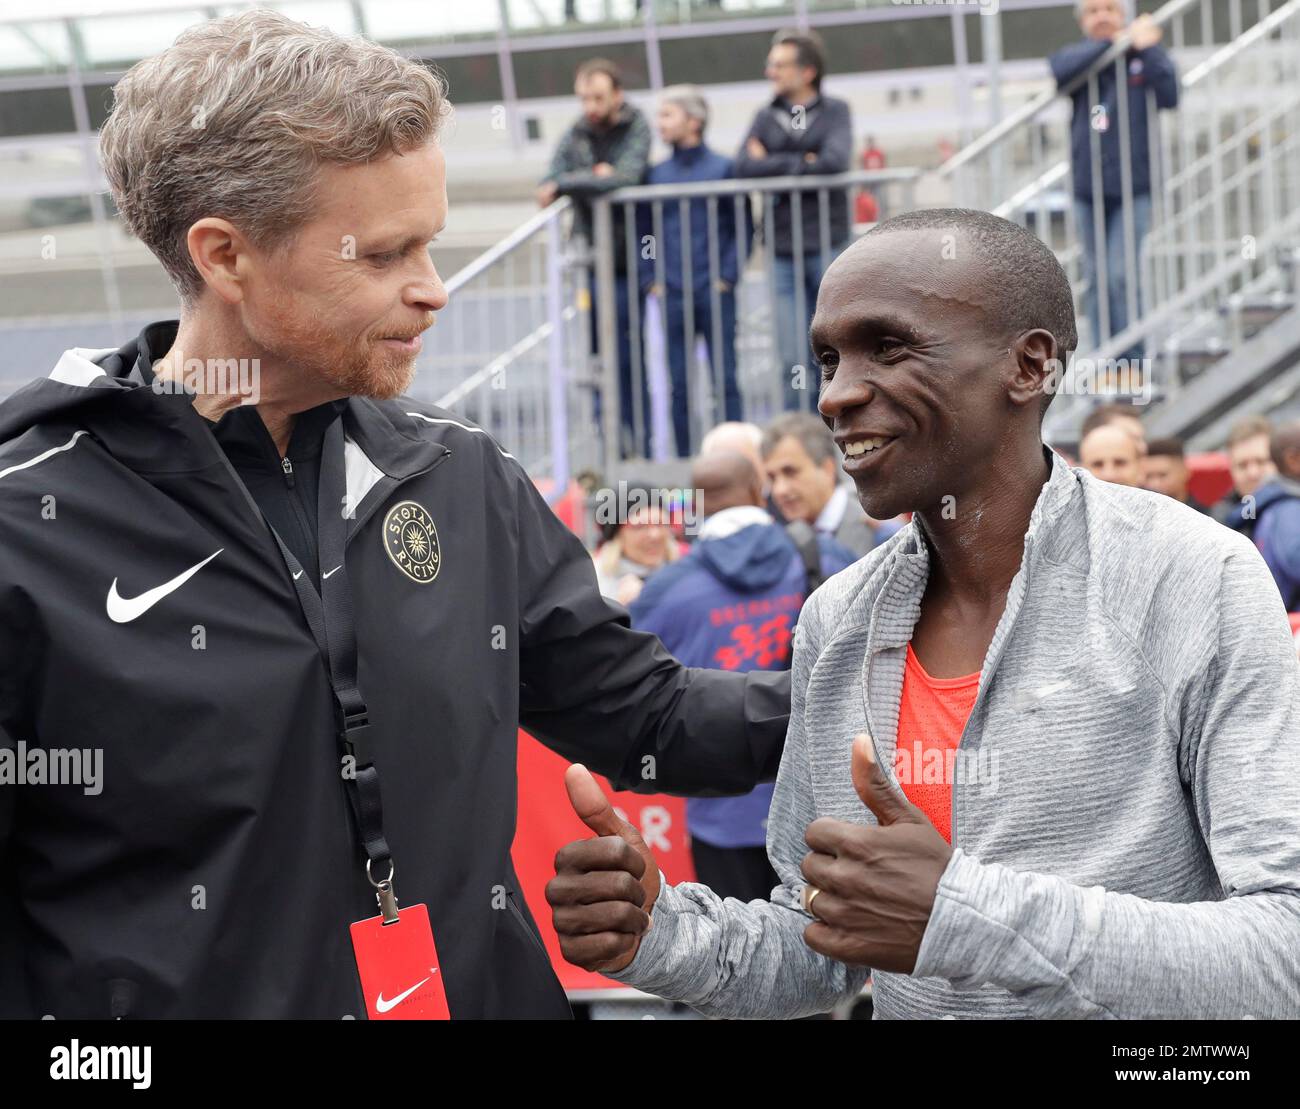 Olympic marathon champion Eliud Kipchoge, right, talks with Nike CEO and  President Mark Parker, , after crossing the finish line of a marathon at  the Monza Formula One racetrack, Italy, Saturday, May